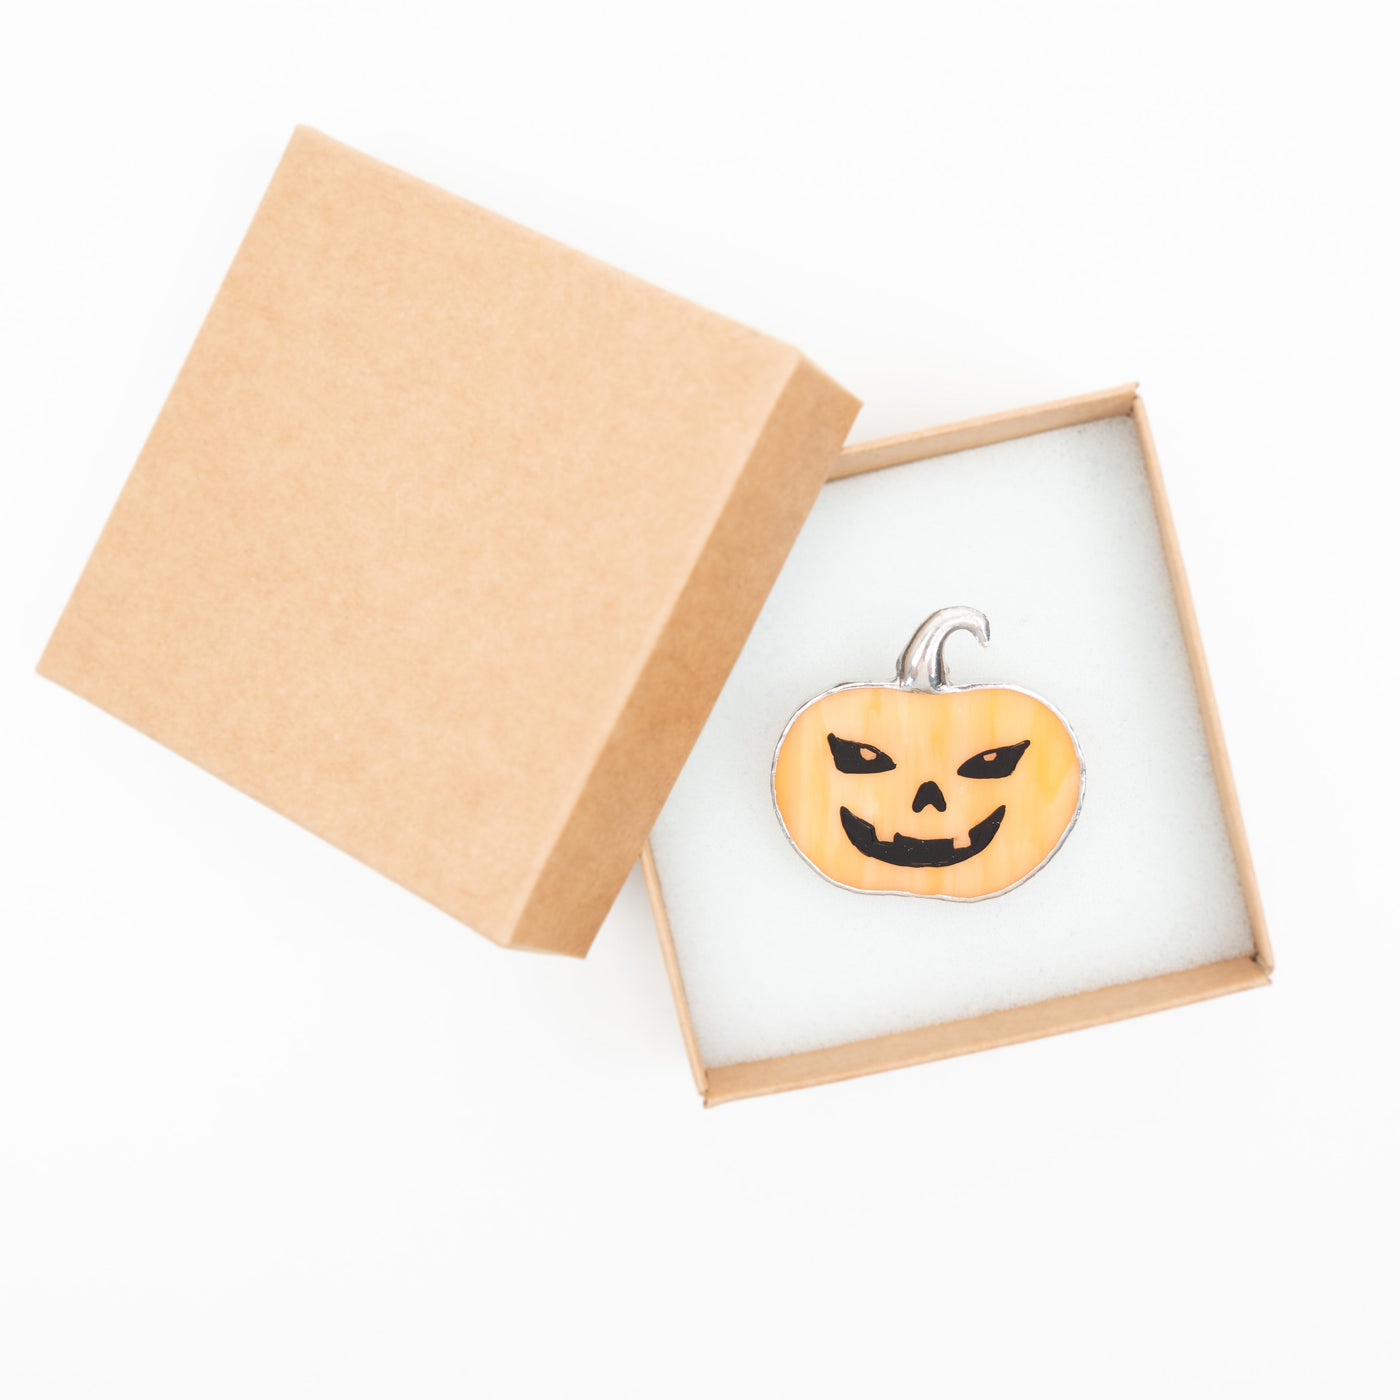 Smiling with teeth pumpkin pin in a brand box